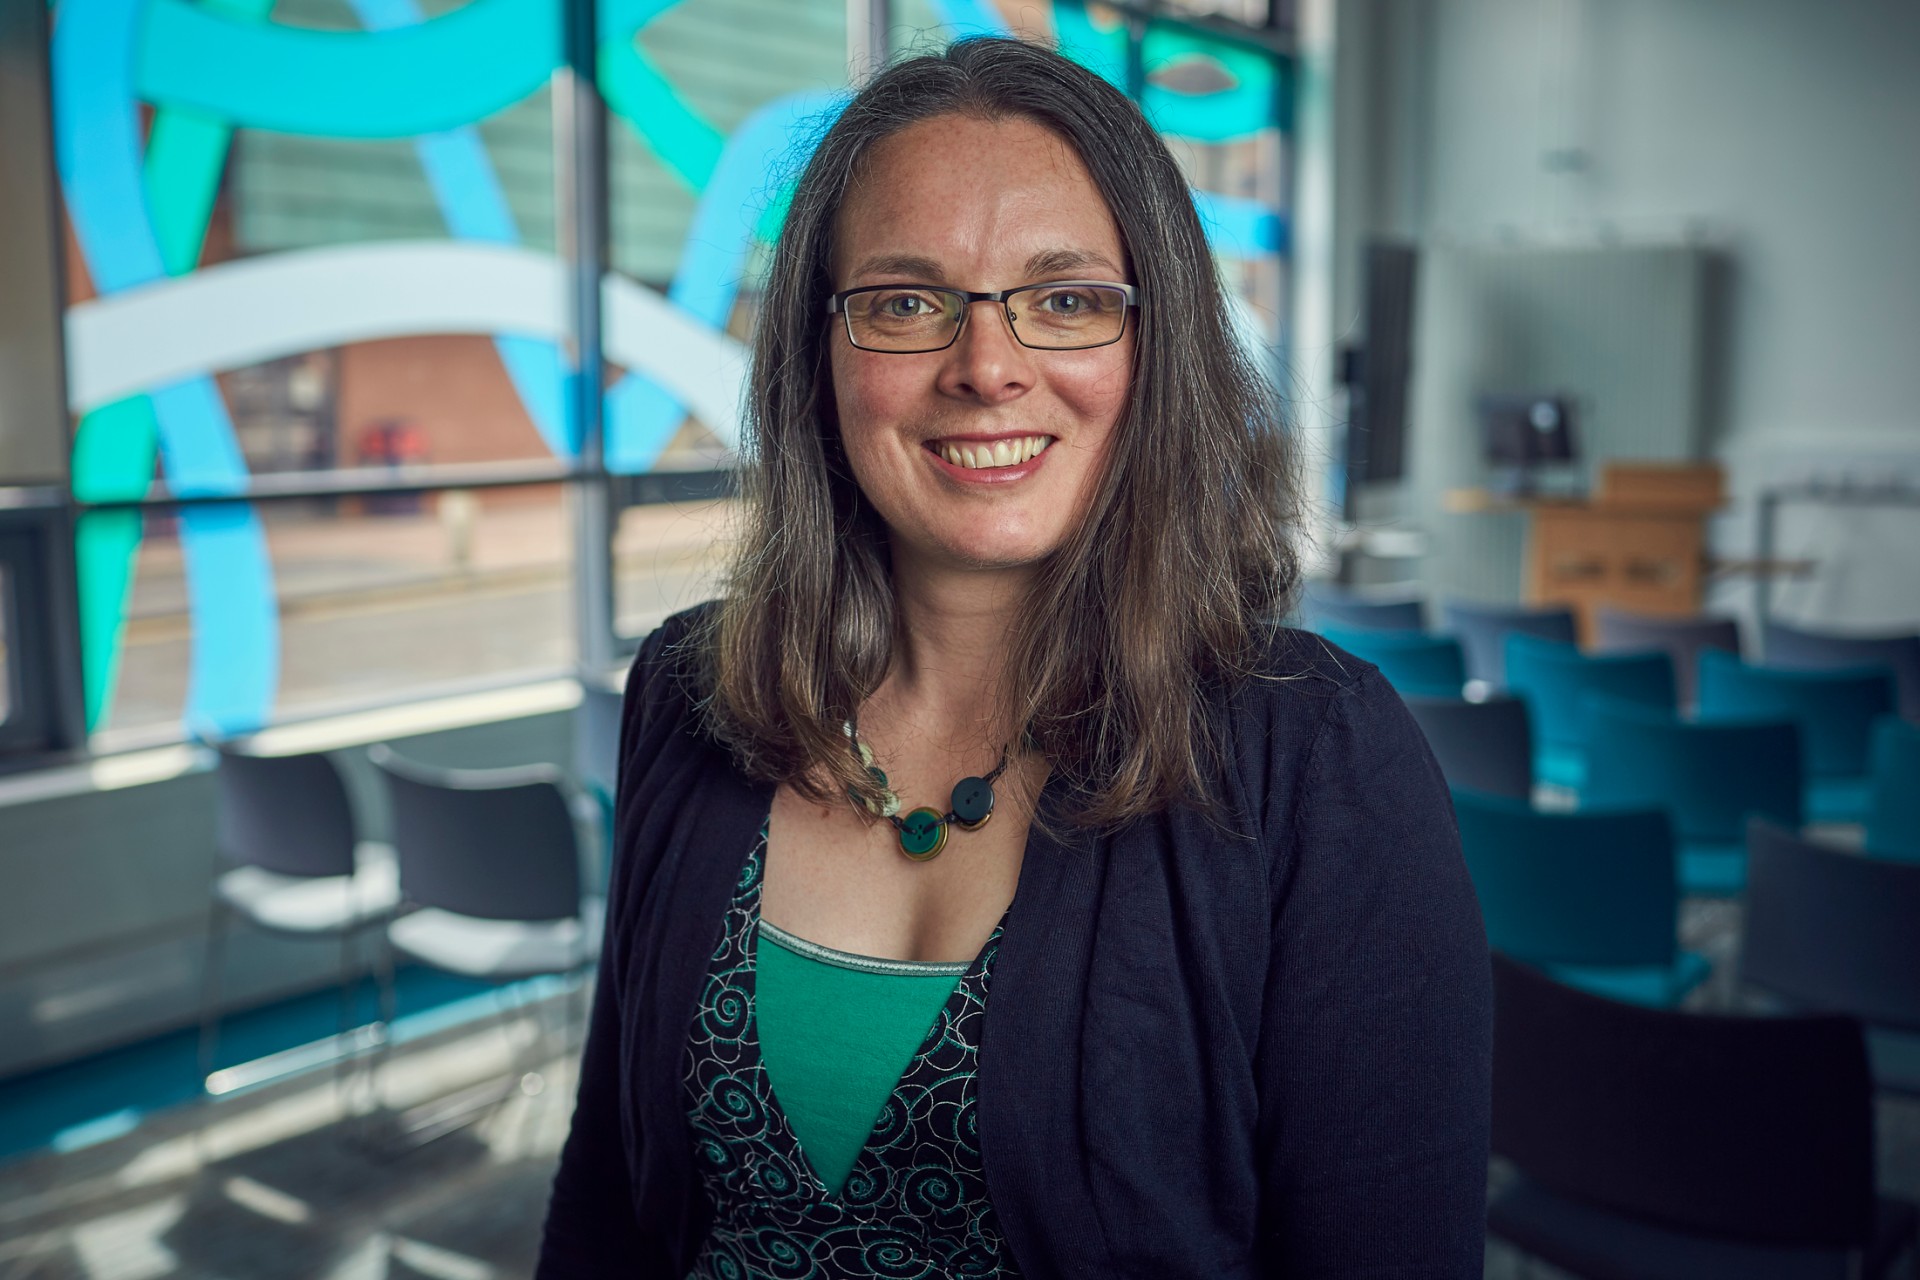 Abertay academic reflects on the strides made by women ahead of International Women's Day